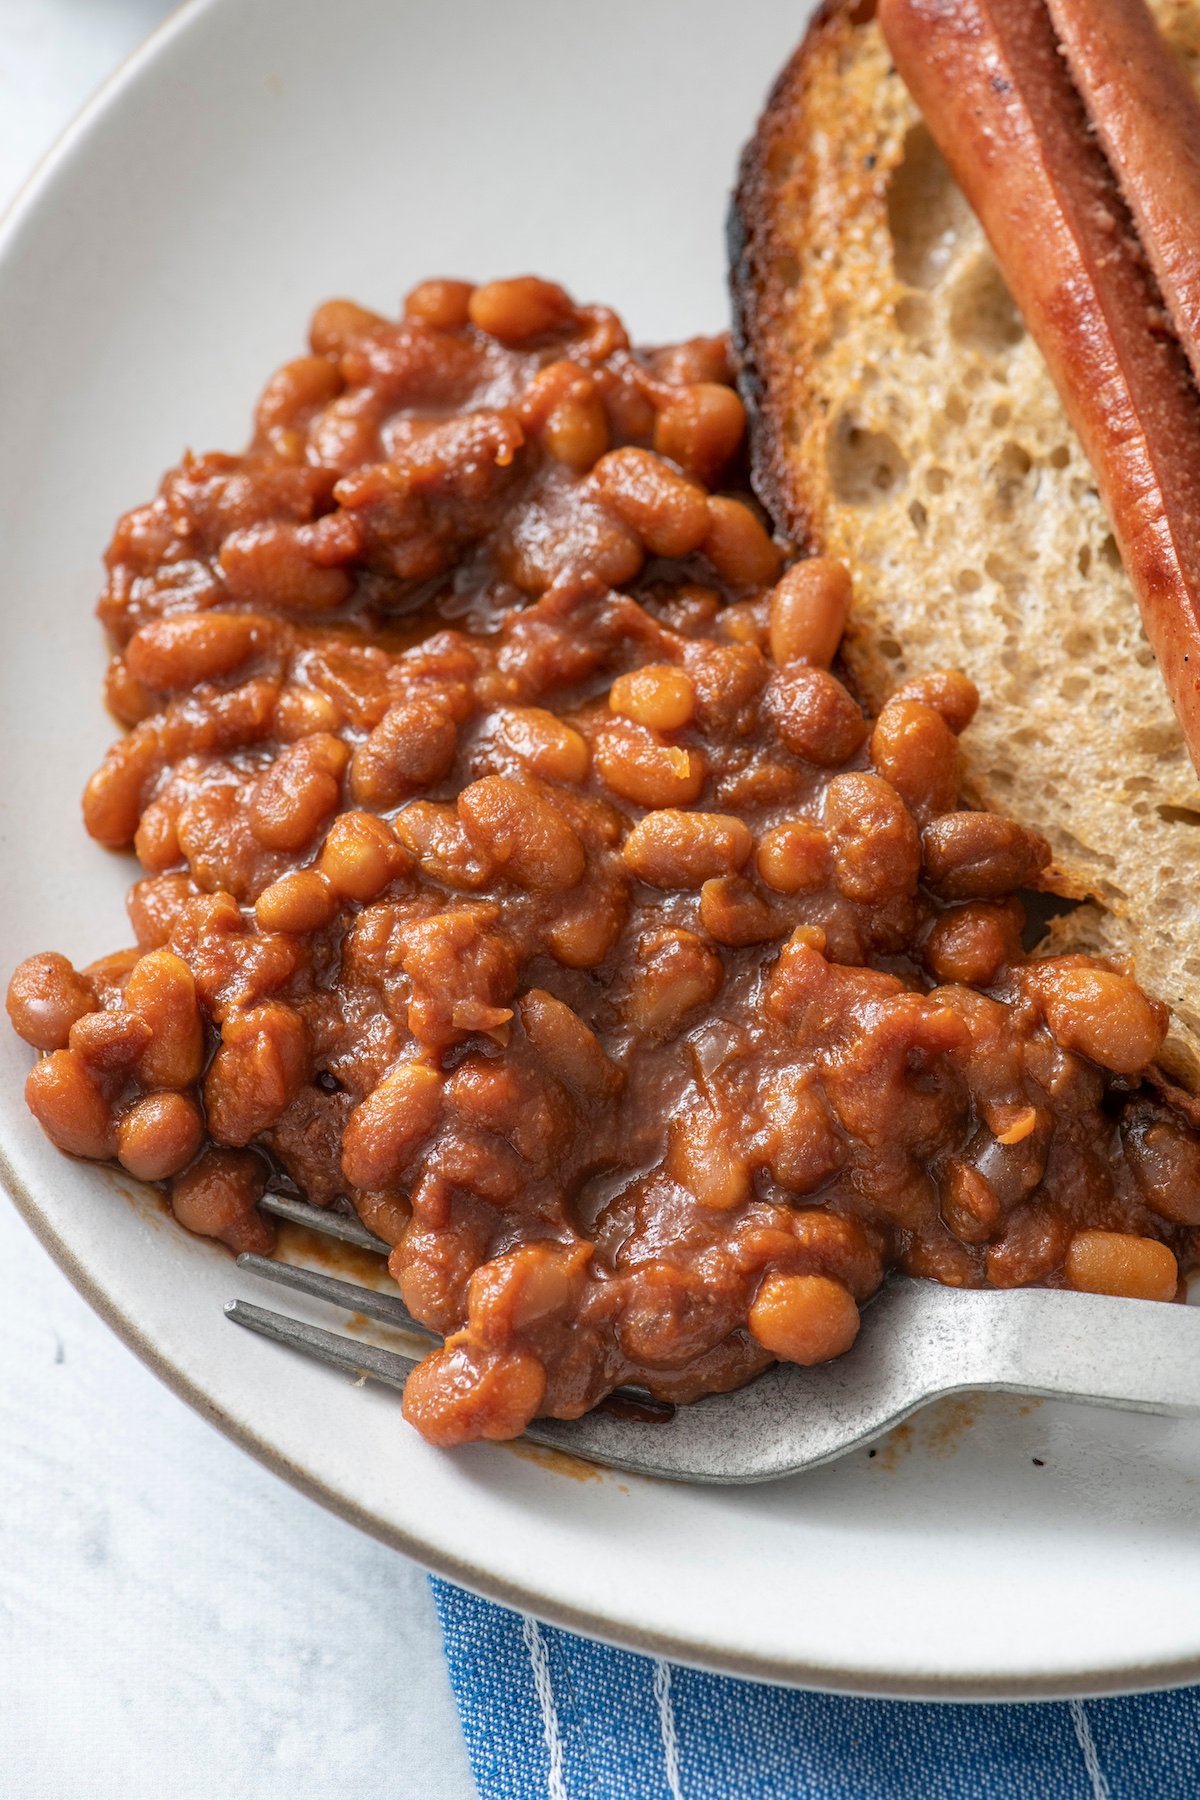 Baked beans on a plate served with a hot dog.